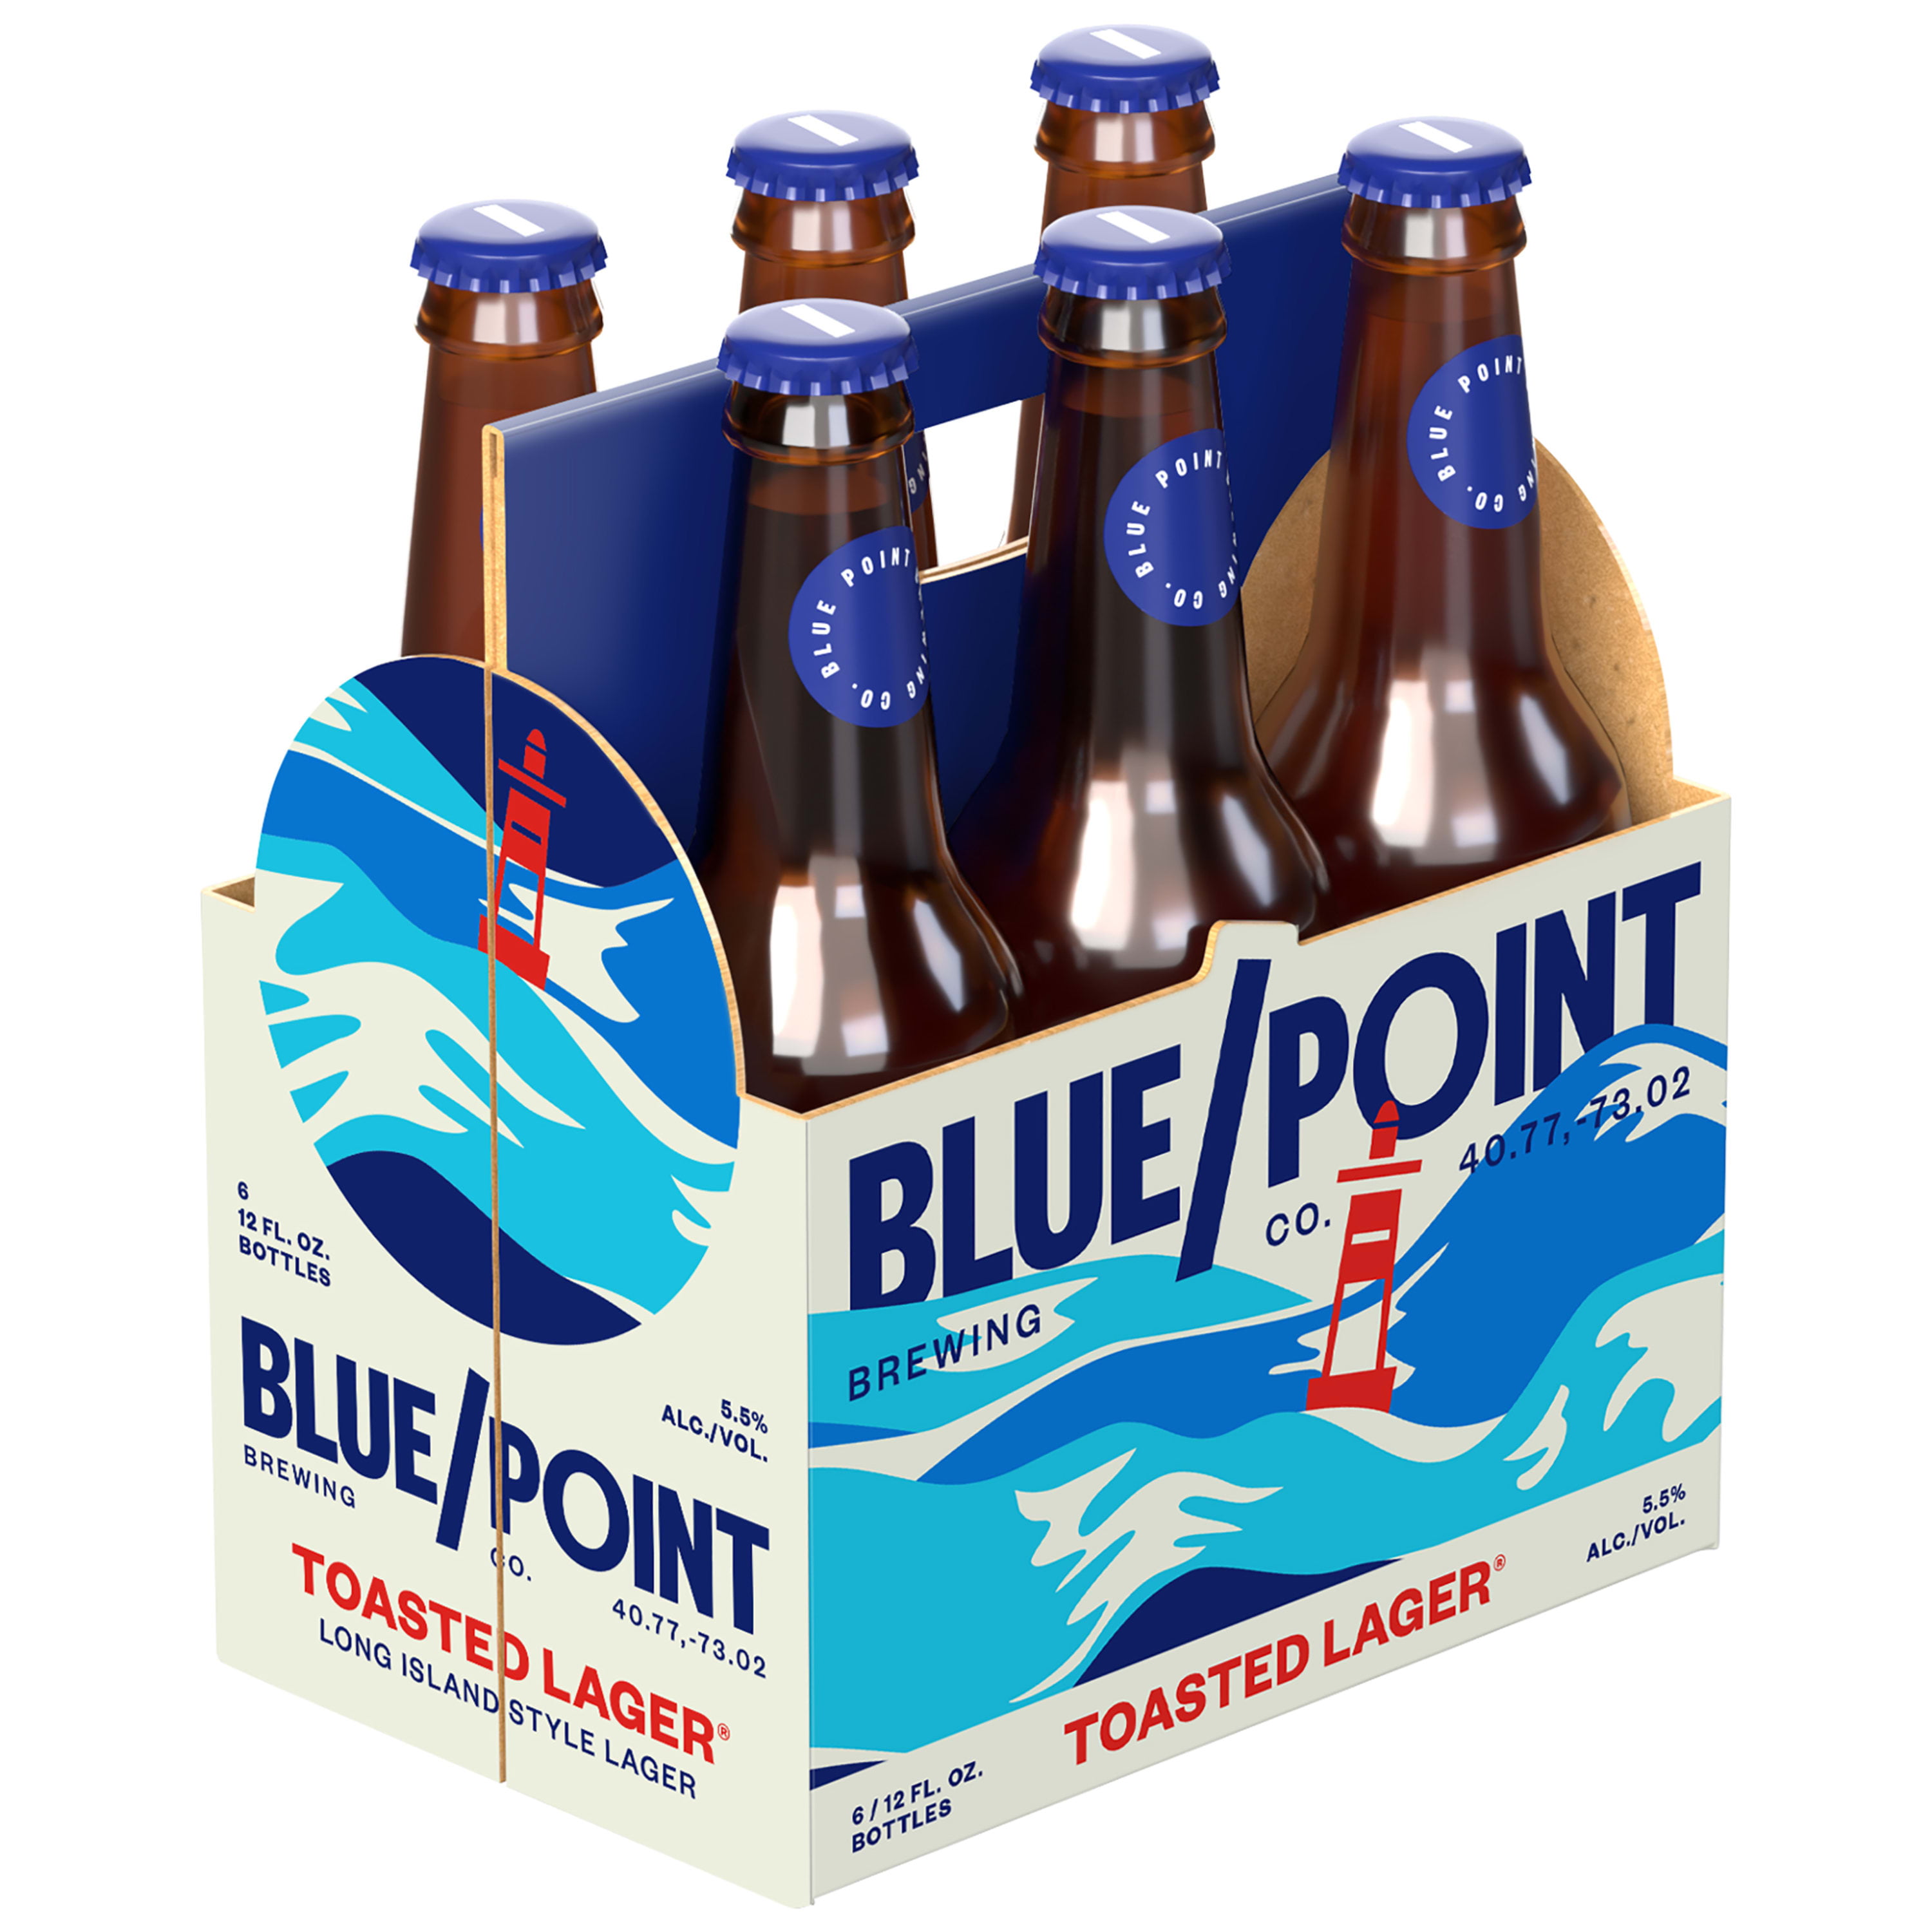 blue-point-brewing-company-toasted-lager-6-pack-12-fl-oz-bottles-5